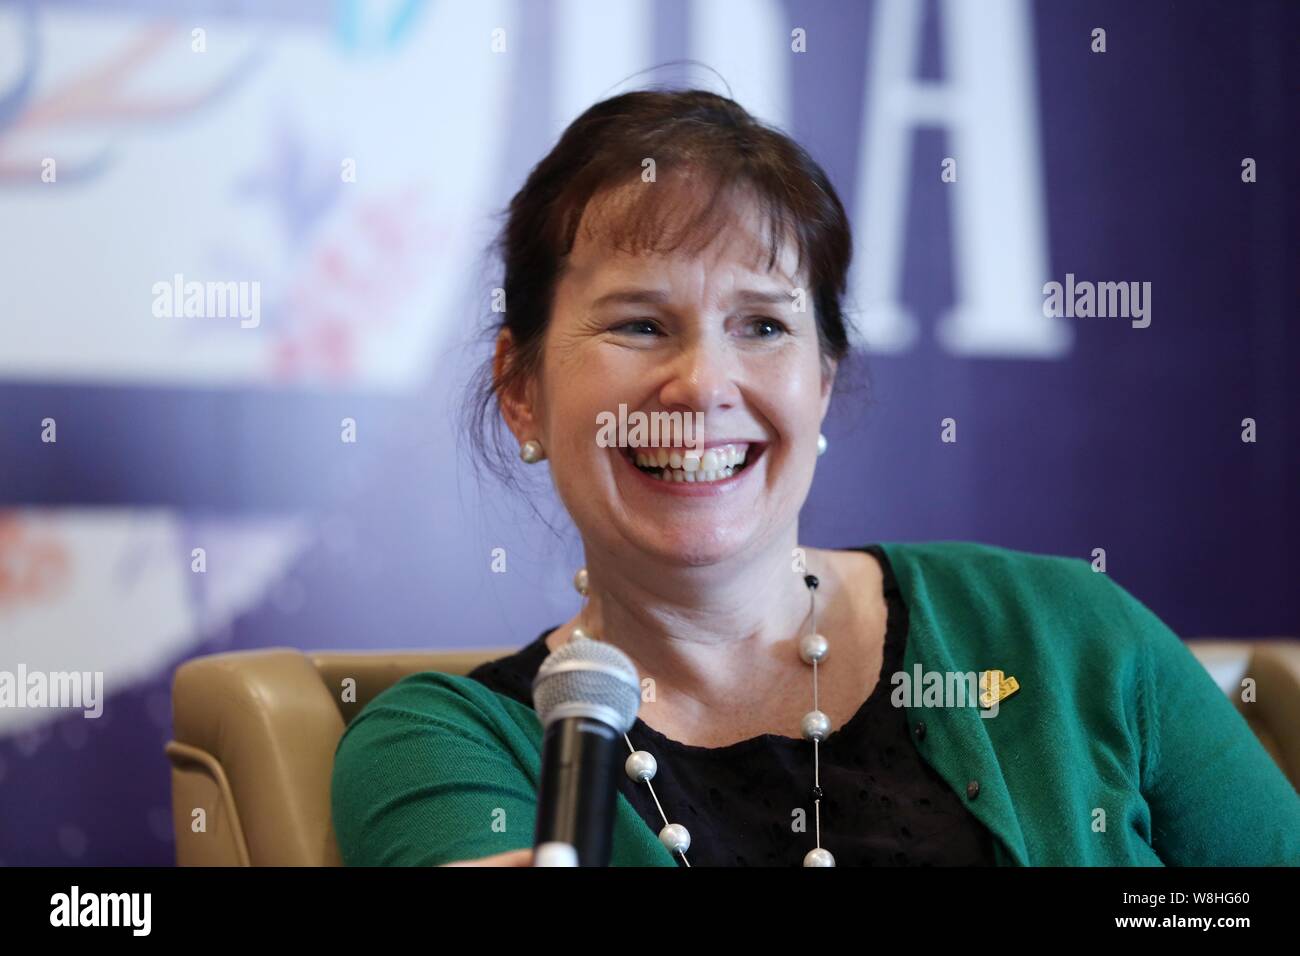 Julie Deane, founder of Cambridge Satchel Company, smiles during the Global Conference on Women and Entrepreneurship held by Alibaba Group in Hangzhou Stock Photo